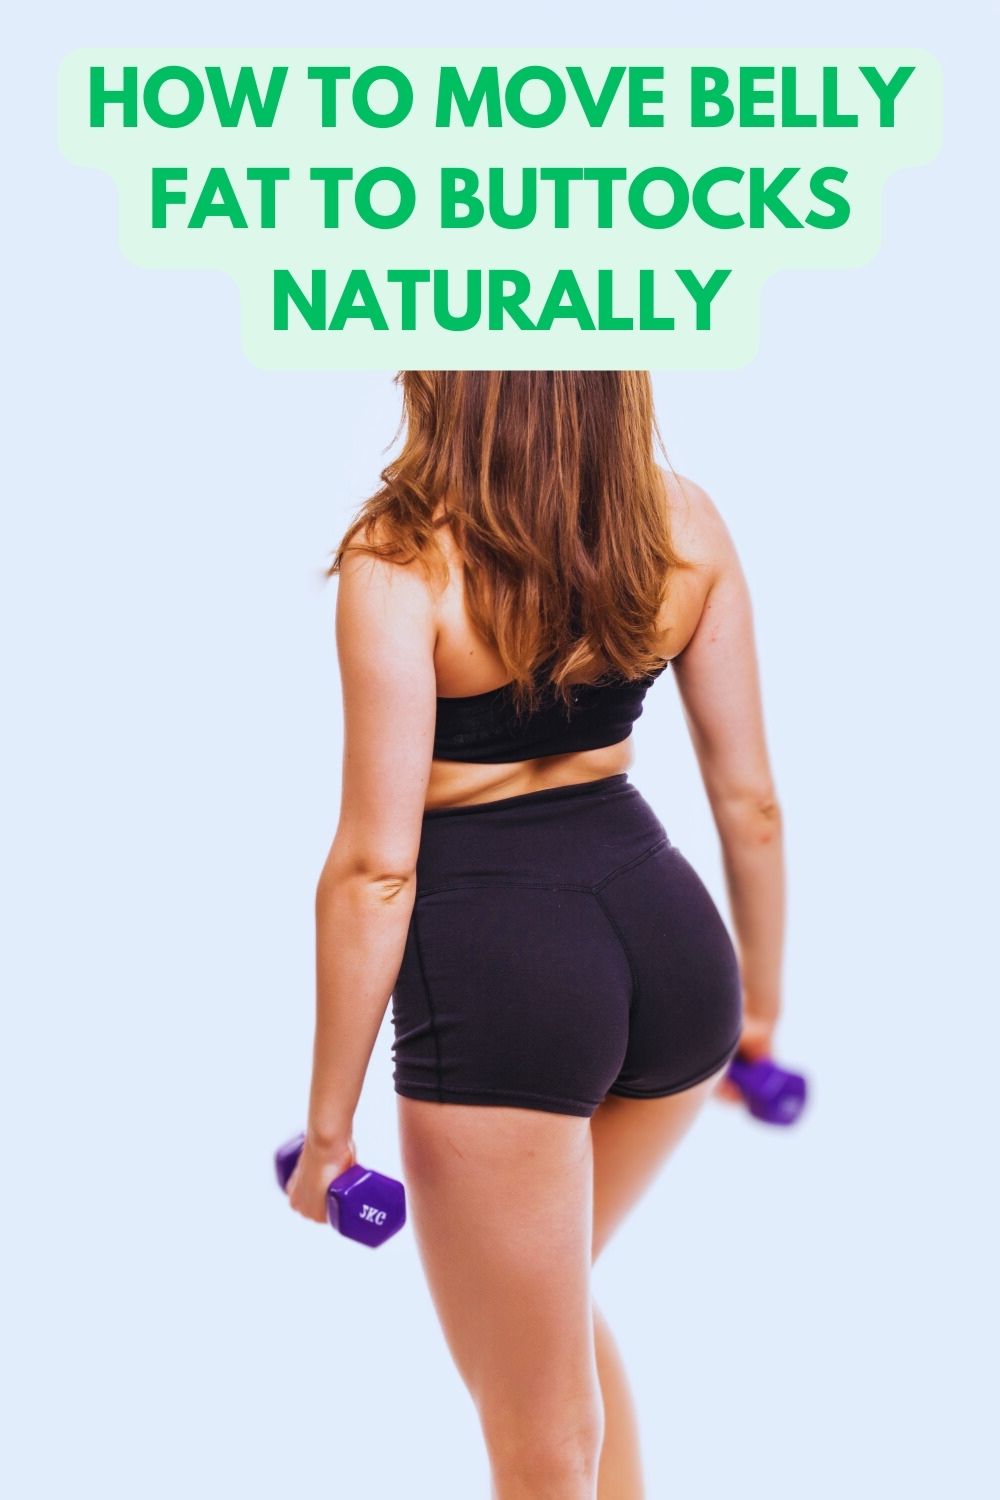 how to move belly fat to buttocks naturally